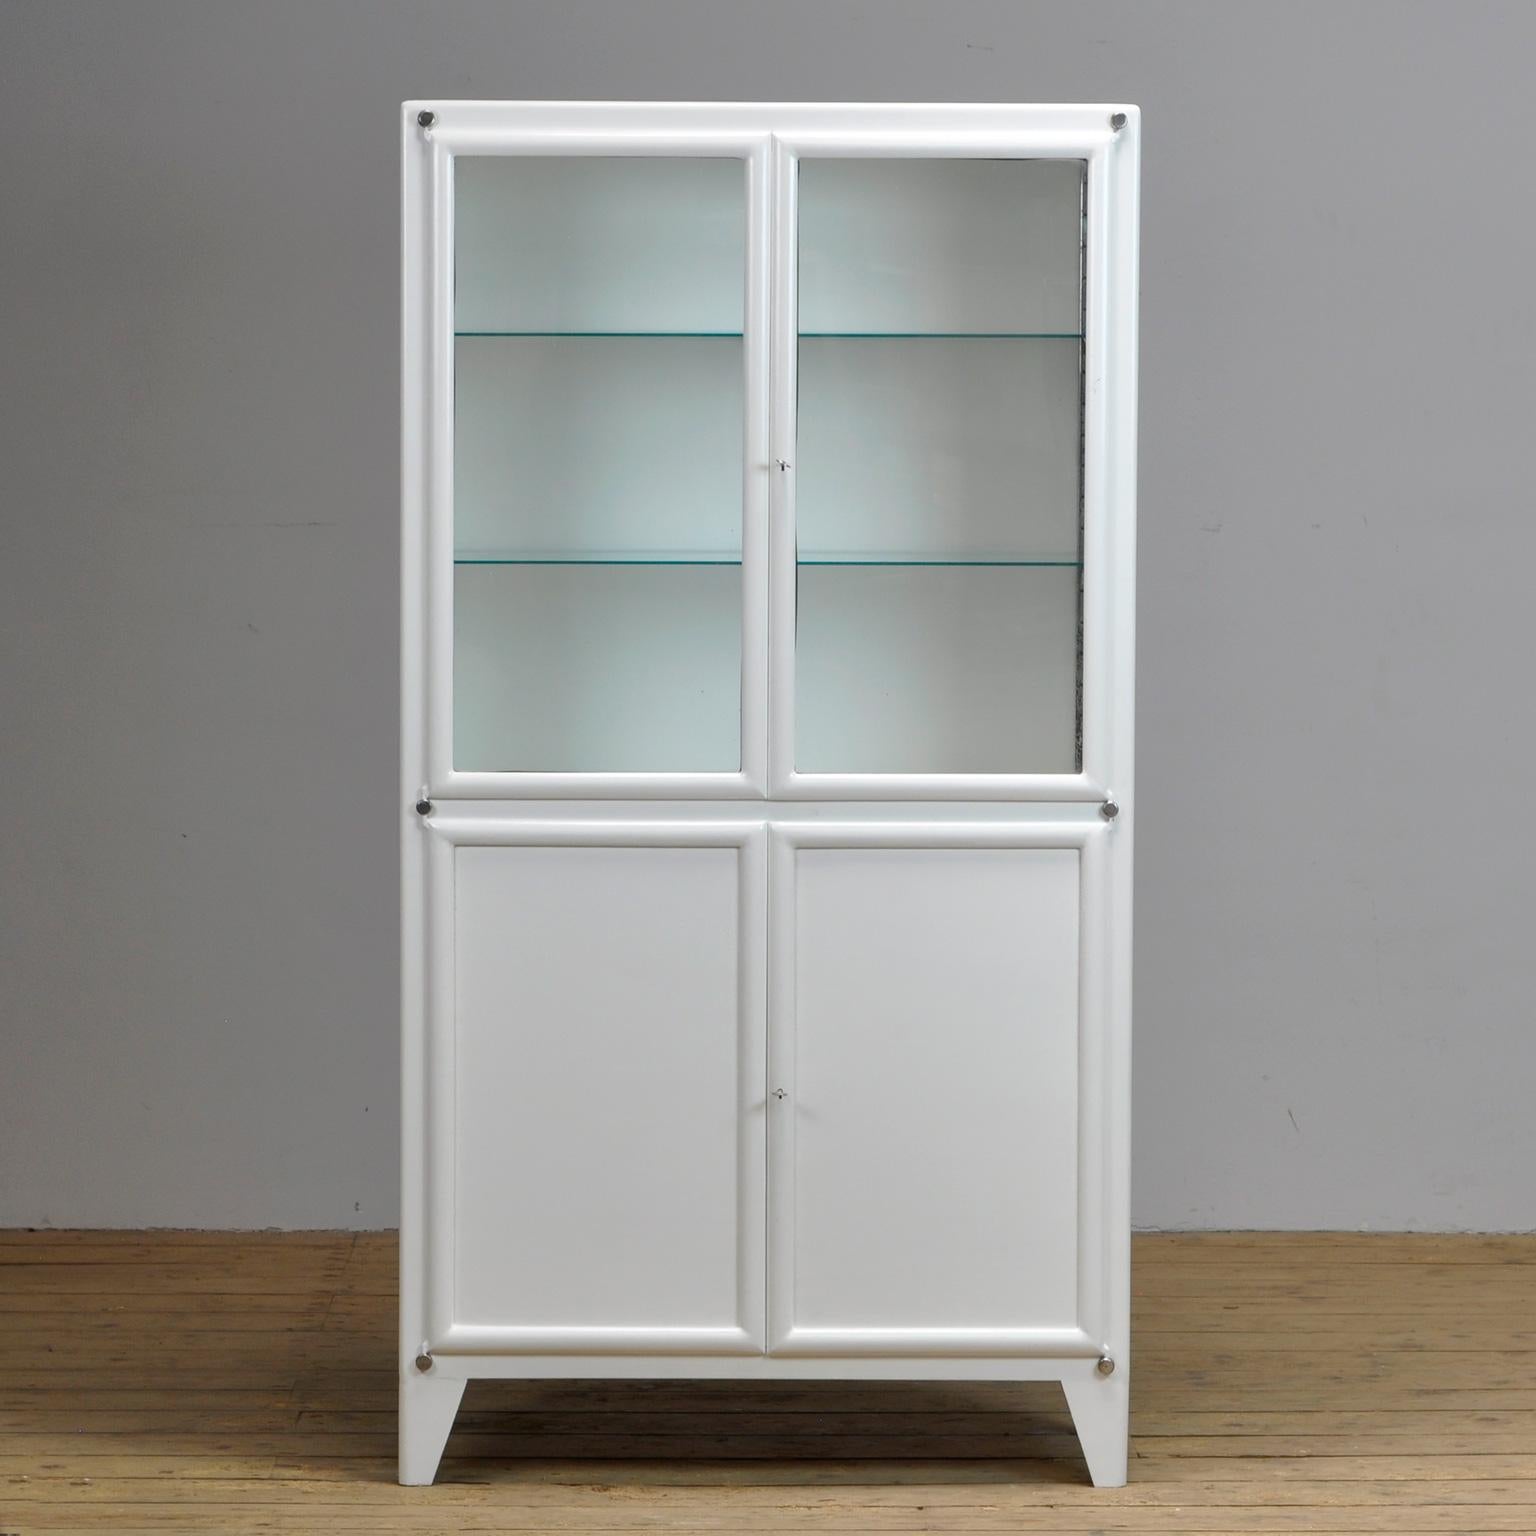 Medical cabinet from Czechoslovakia, produced by Kovona, circa 1950. With two adjustable shelves in the top part and one shelf in the lower part Original paint and locks.
    